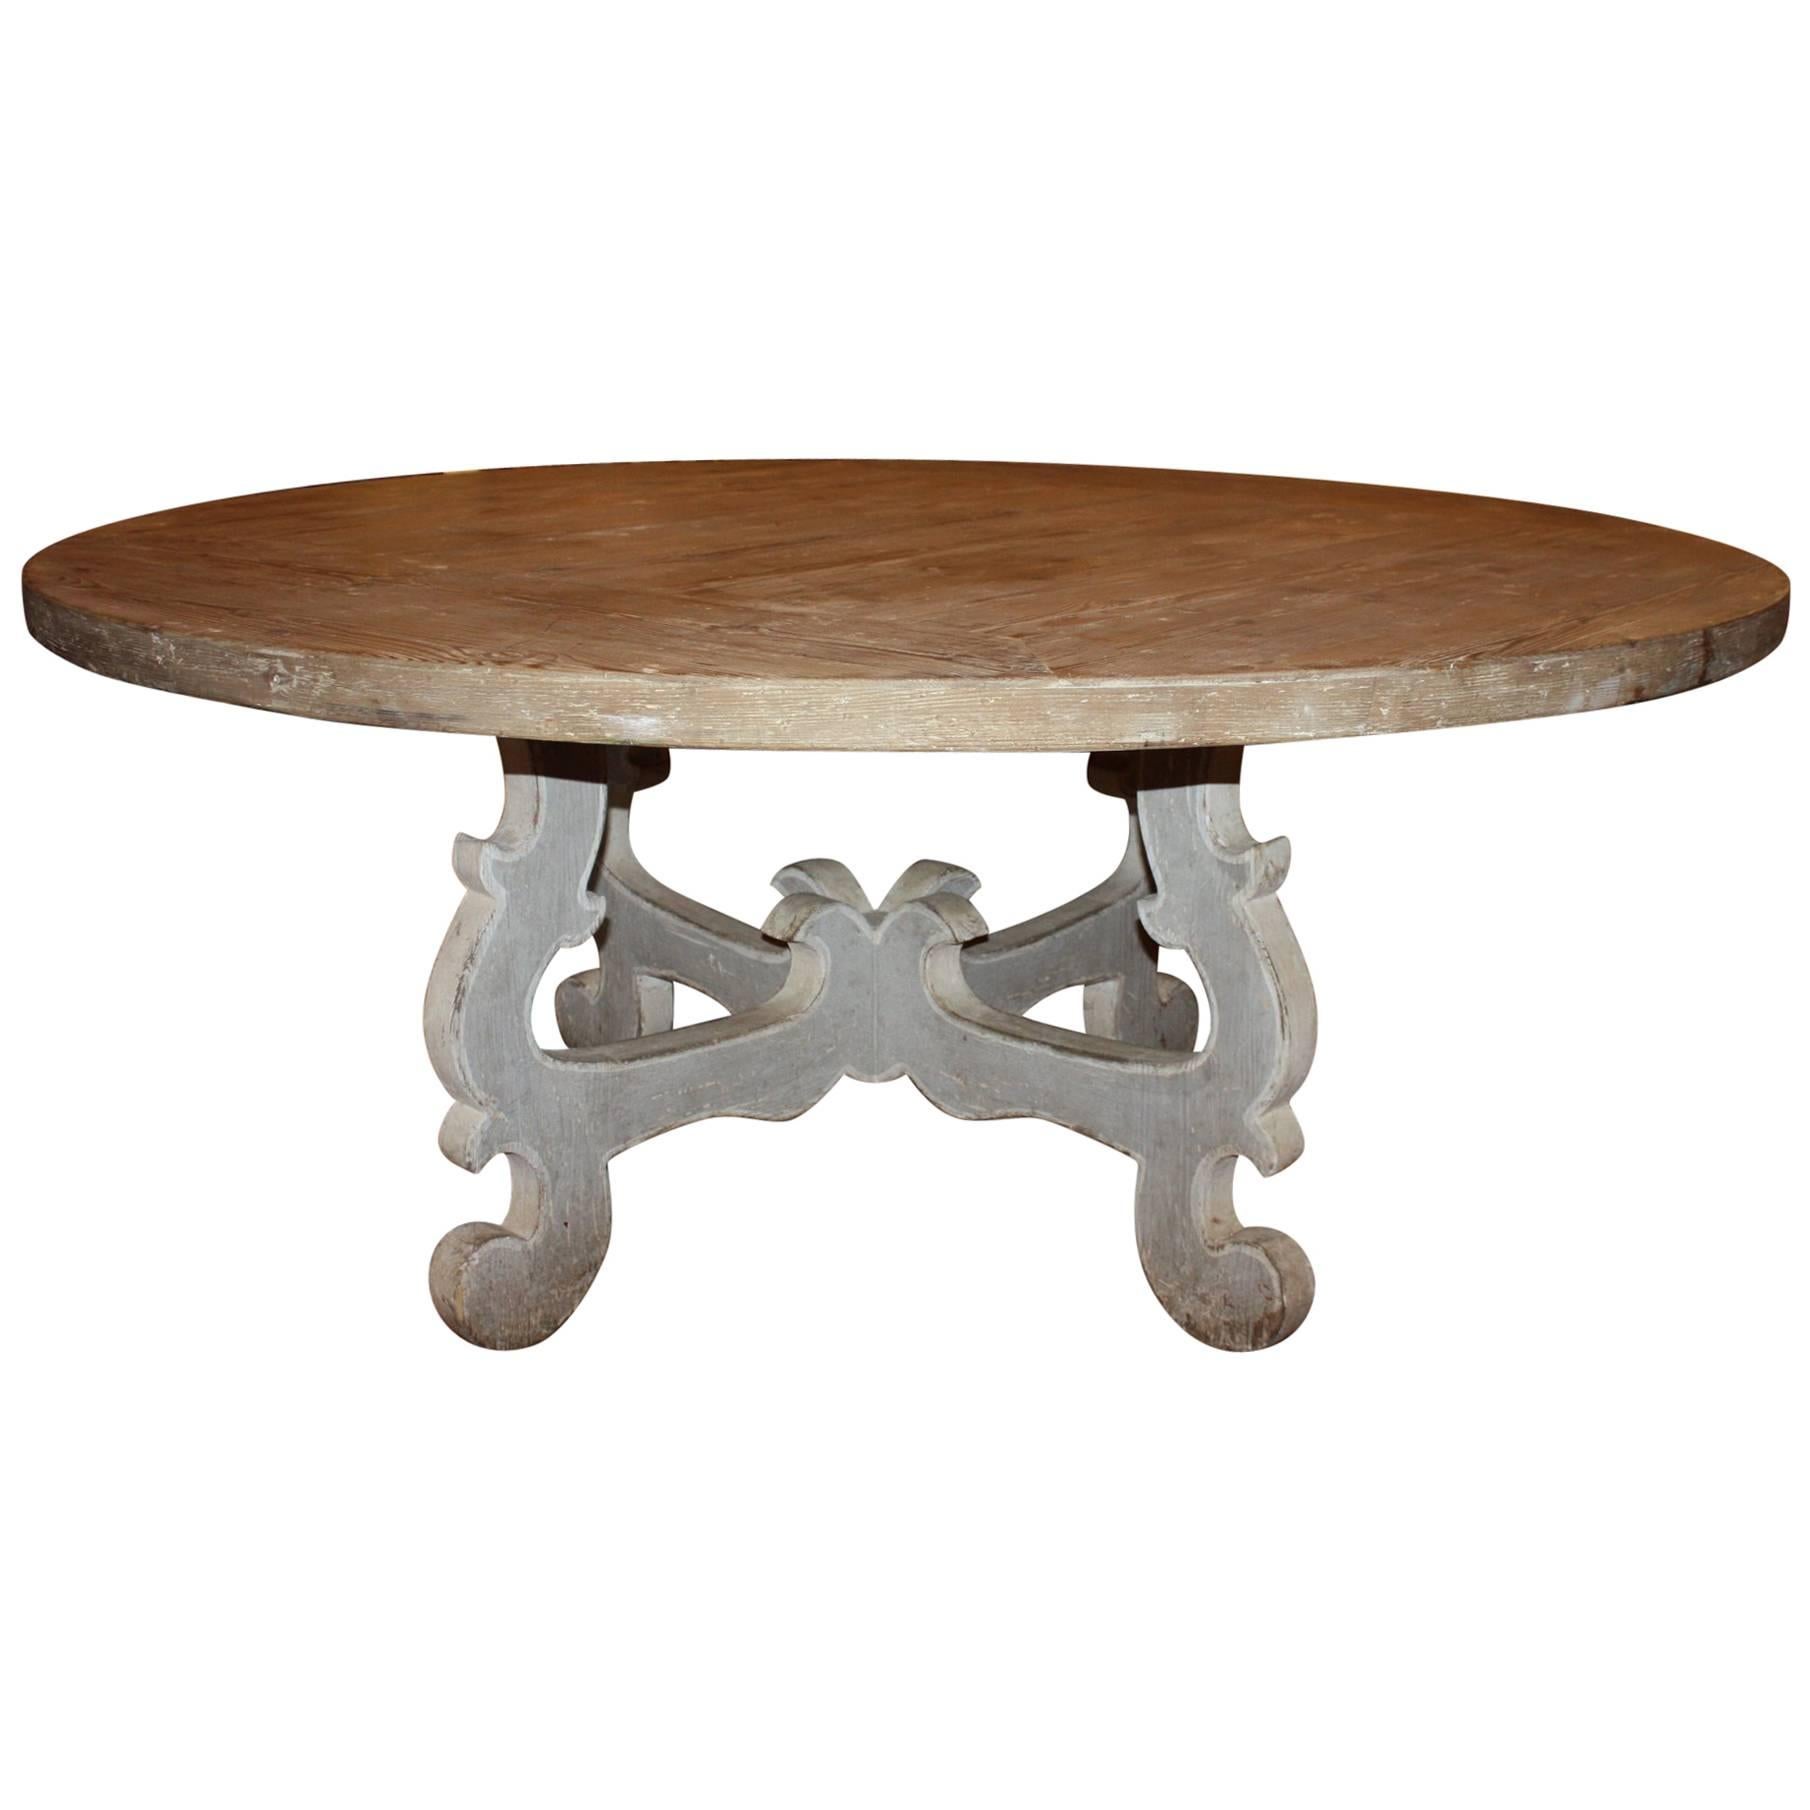 Round Italian Trestle Dining Table with Painted Base and Natural Wood Top